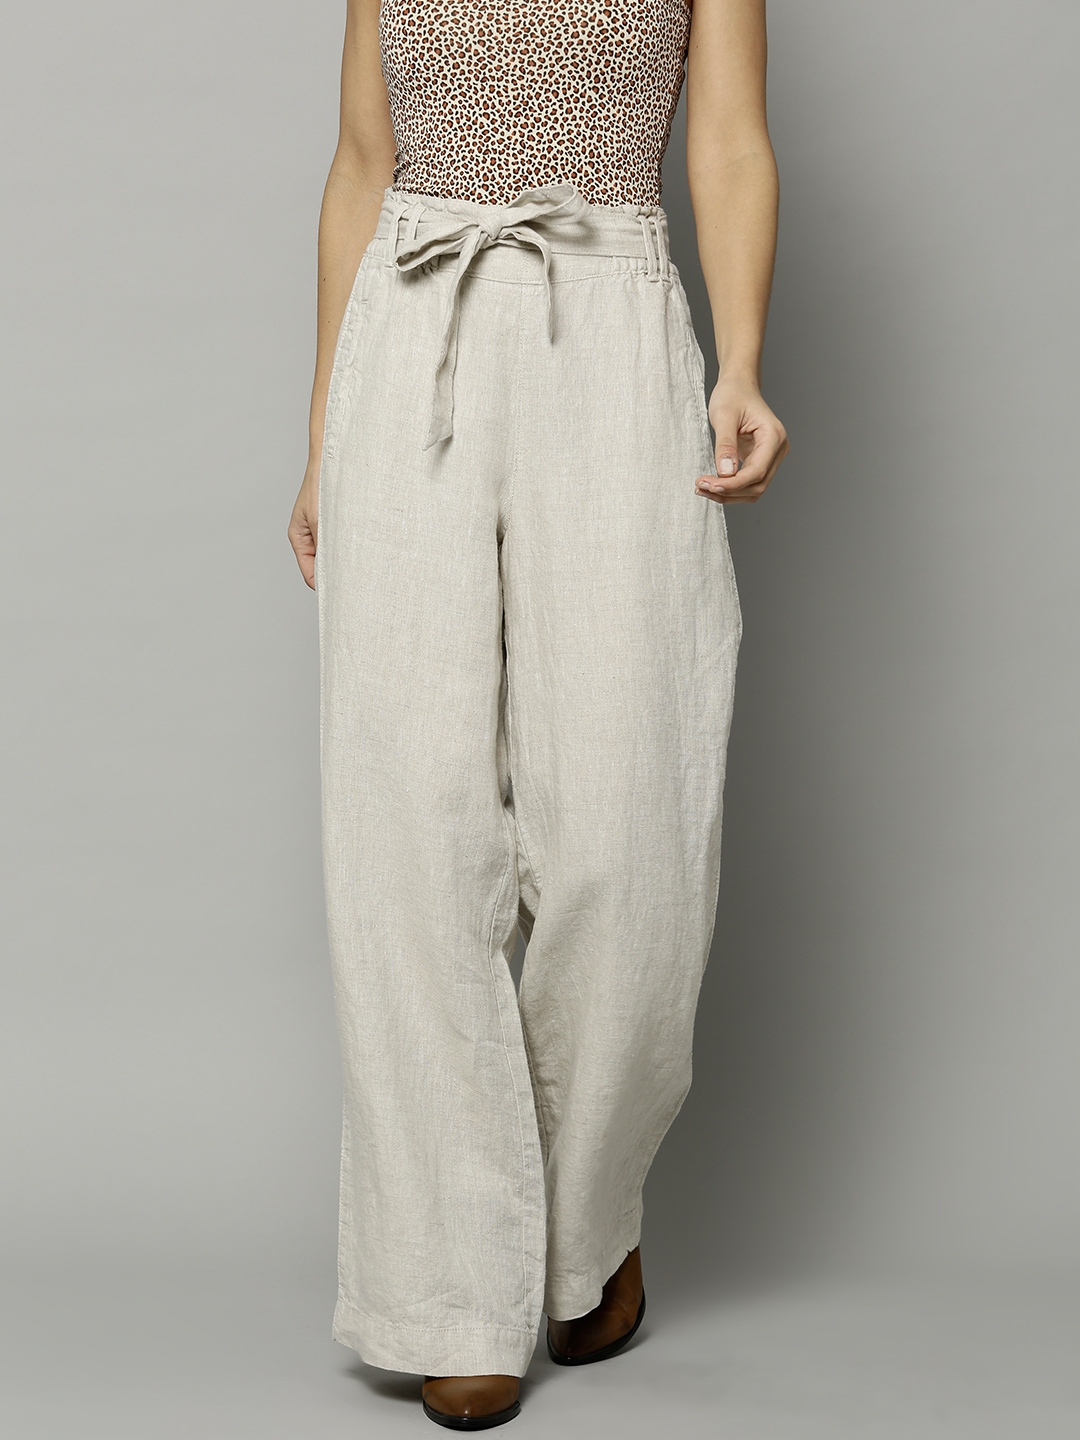 Checked Wide Leg Trousers  Wide leg trousers outfit Printed trousers  outfit Trousers women